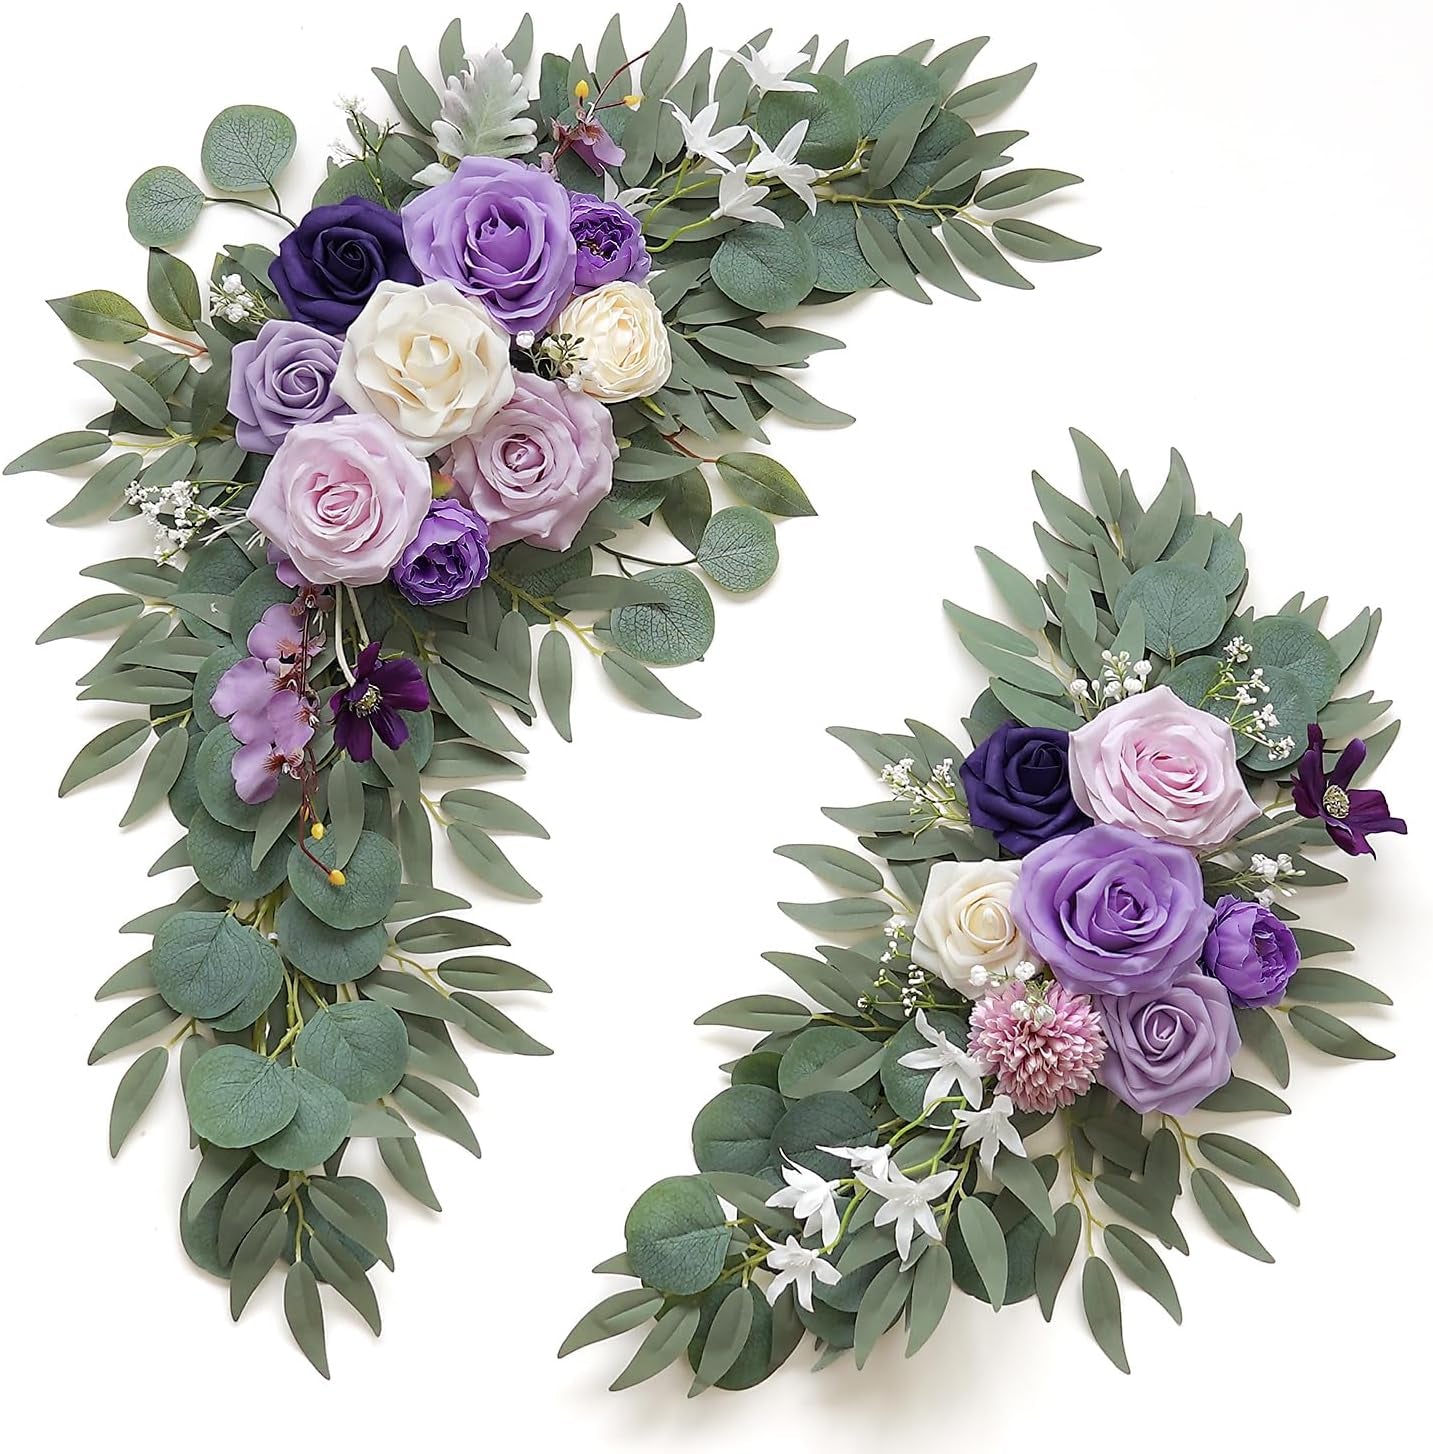 Faux Flower Swag Set of 2 for Wedding Welcome Signs Floral Decorations, Sage Green Wedding Arch Flowers for Wedding Reception Ceremony